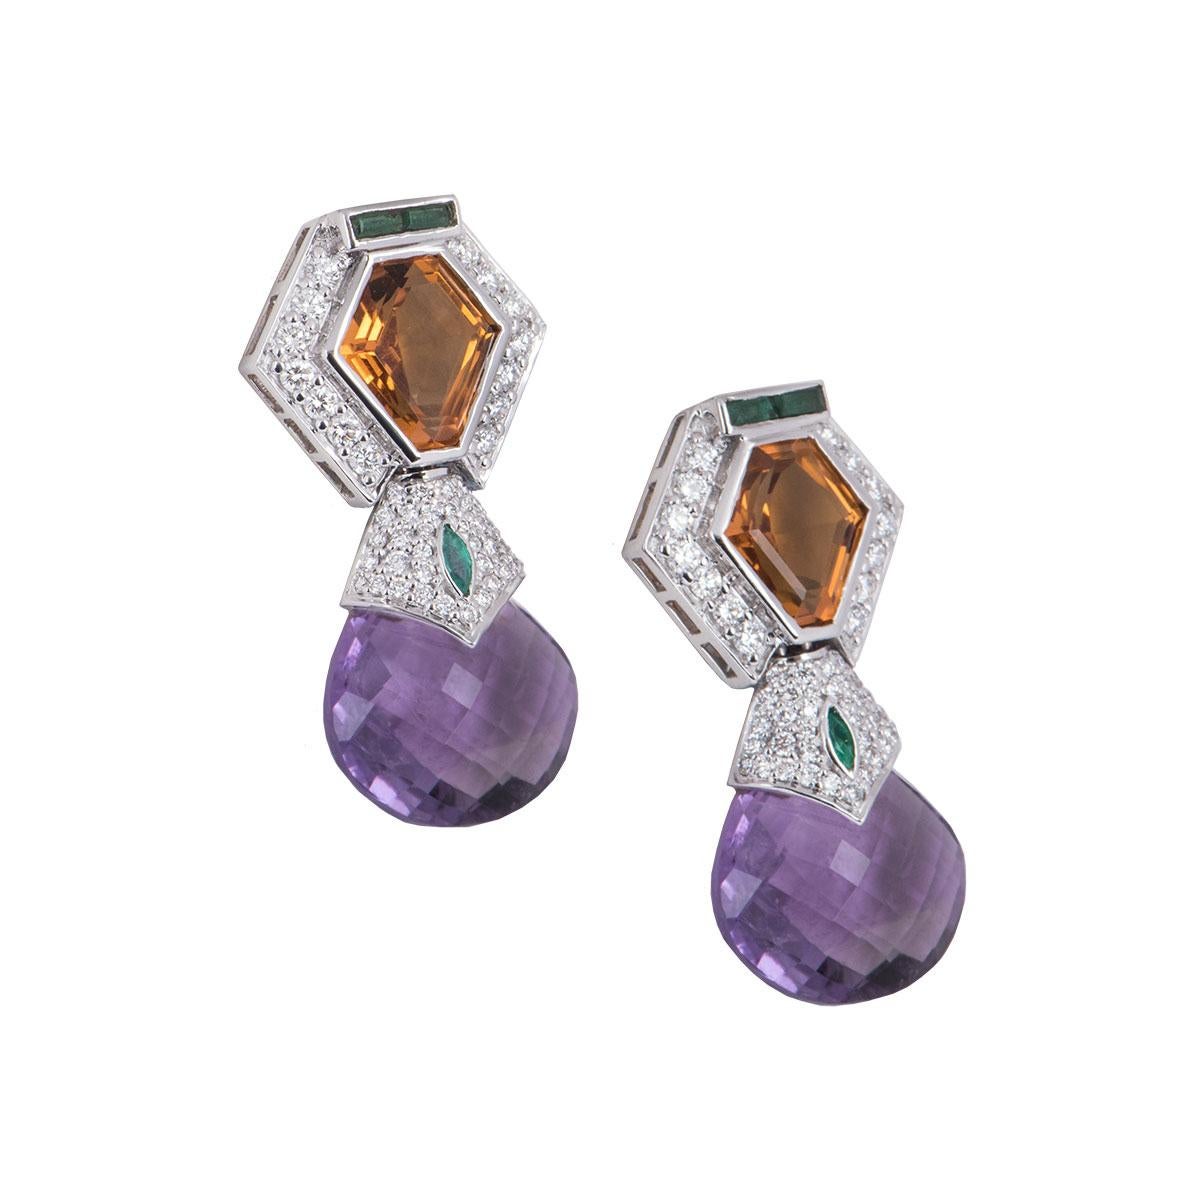 An 18k white gold pair of diamond, amethyst and citrine earrings. The earrings feature a citrine stone set in the centre with round brilliant cut diamonds surrounding it with a tear drop shaped amethyst suspended underneath it moving freely. The